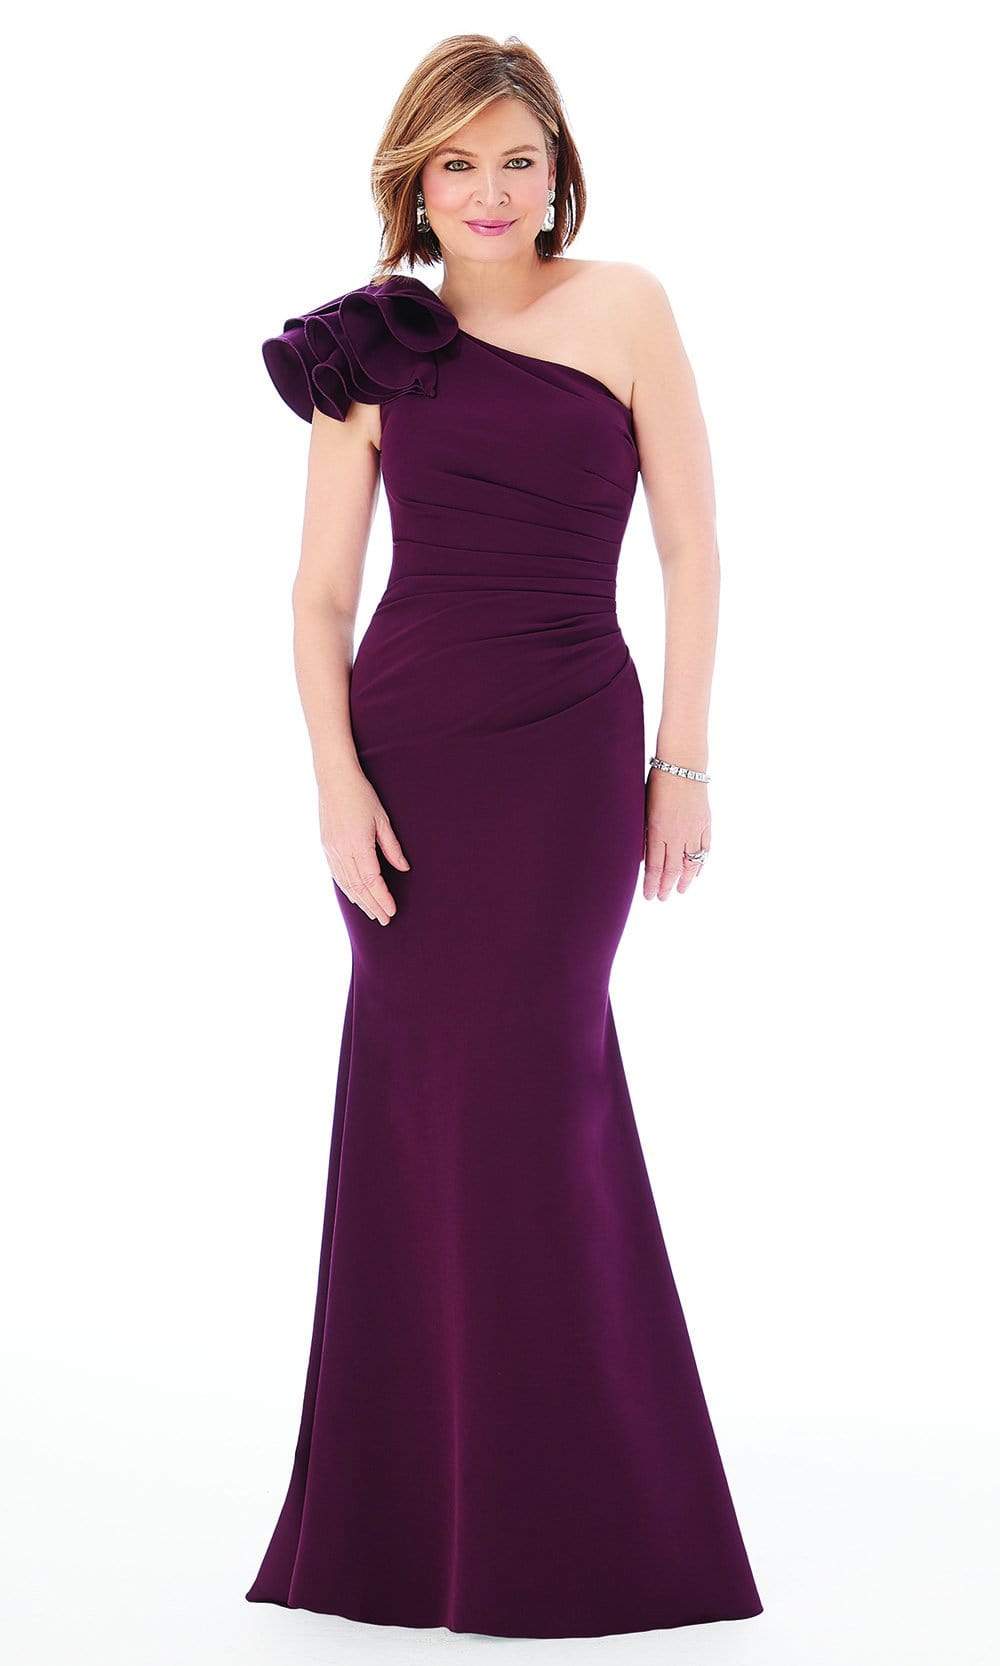 MGNY By Mori Lee 72235SC - One Shoulder Crepe Evening Dress